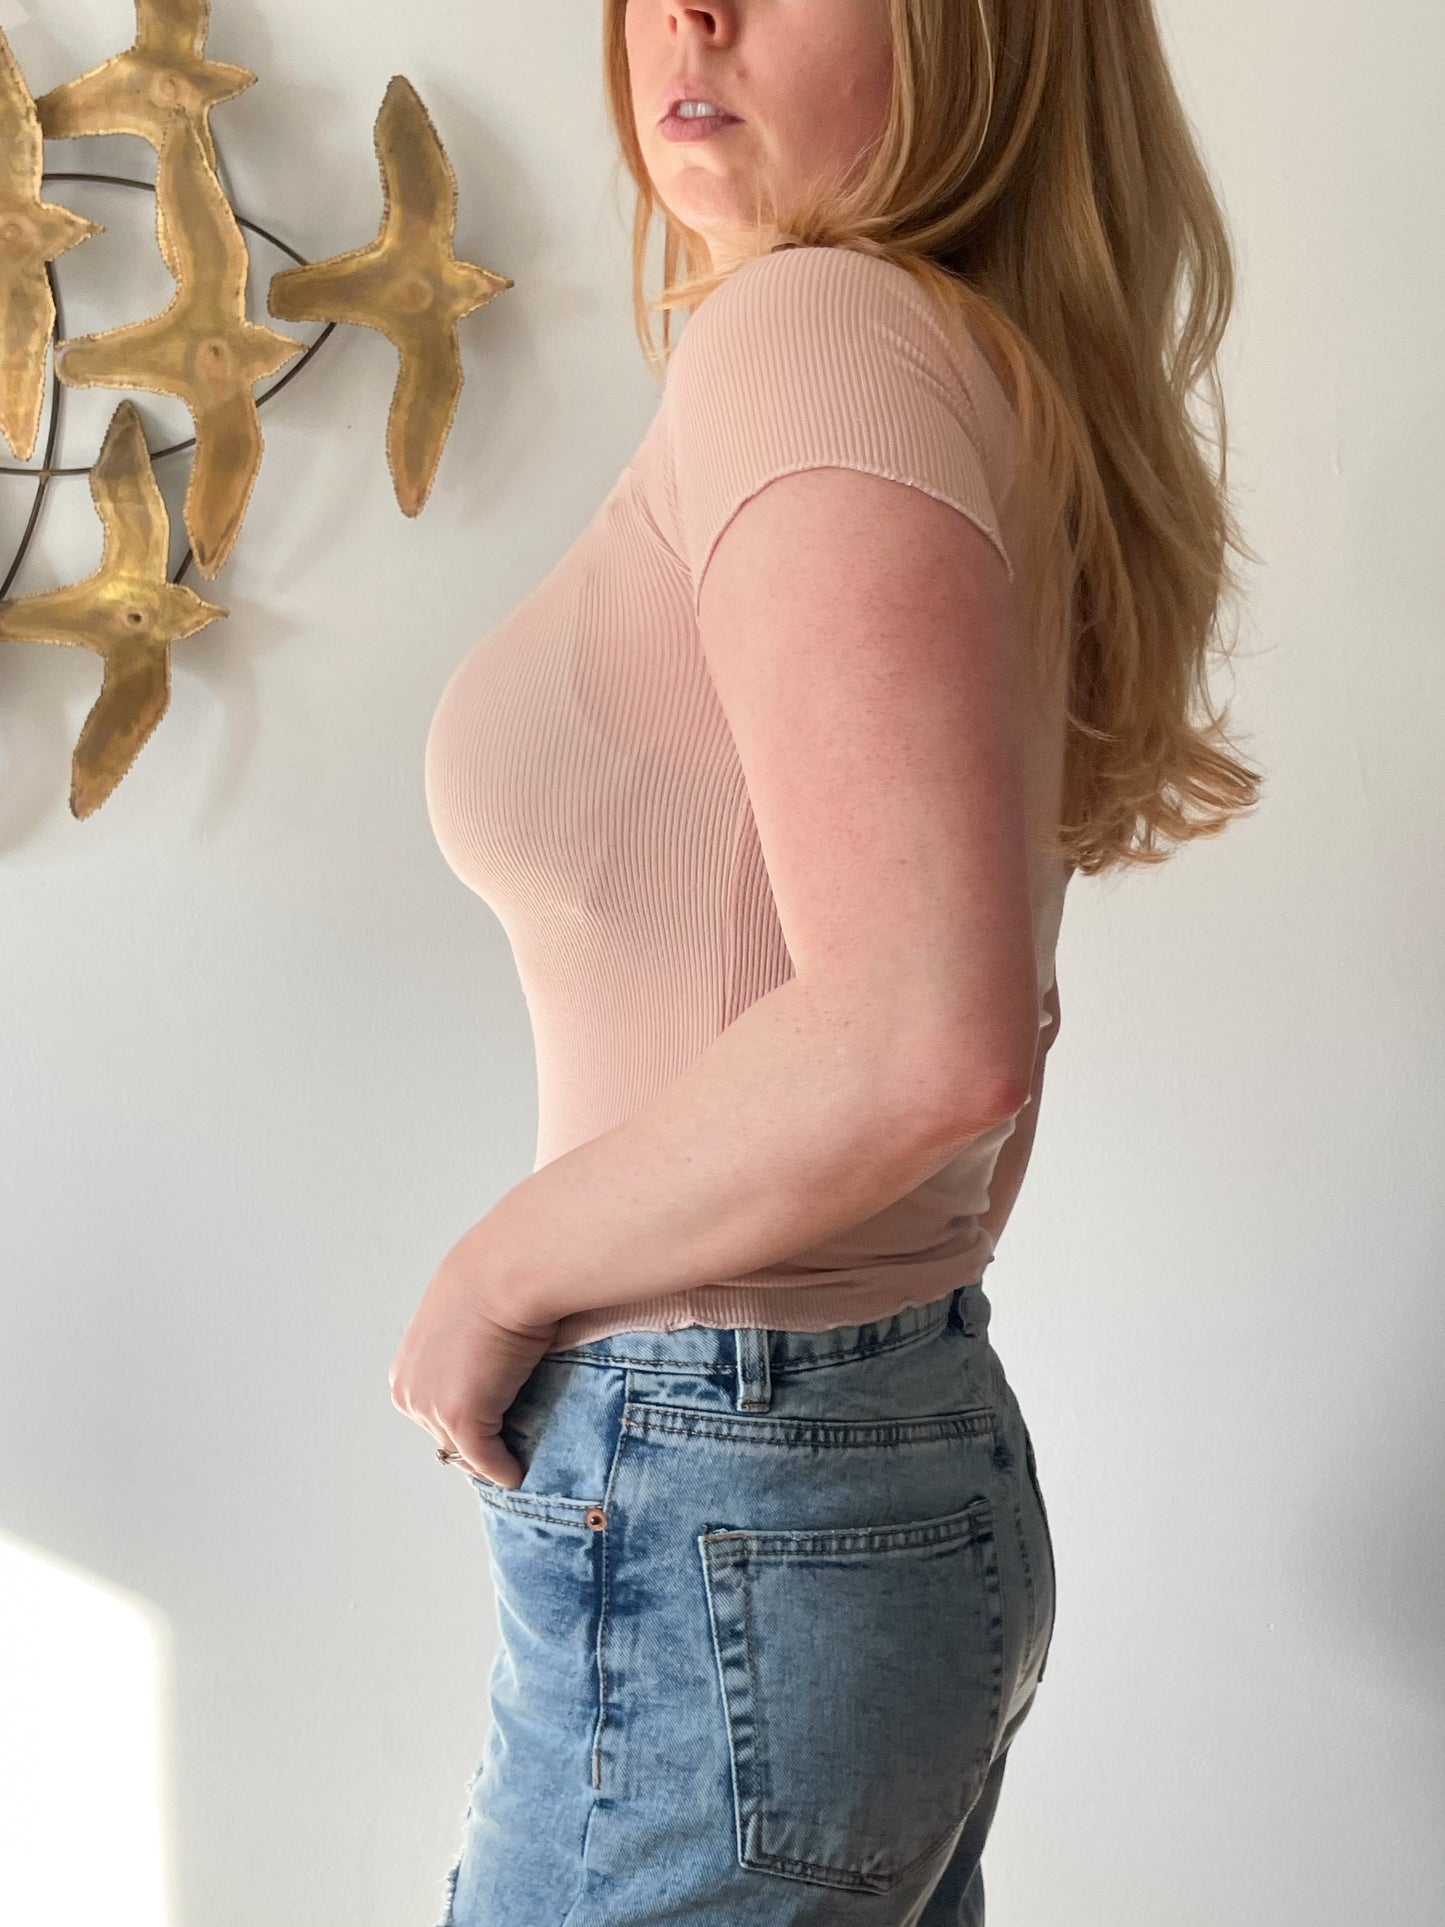 Blush Pink Ribbed Stretch Cropped Top - XS/S